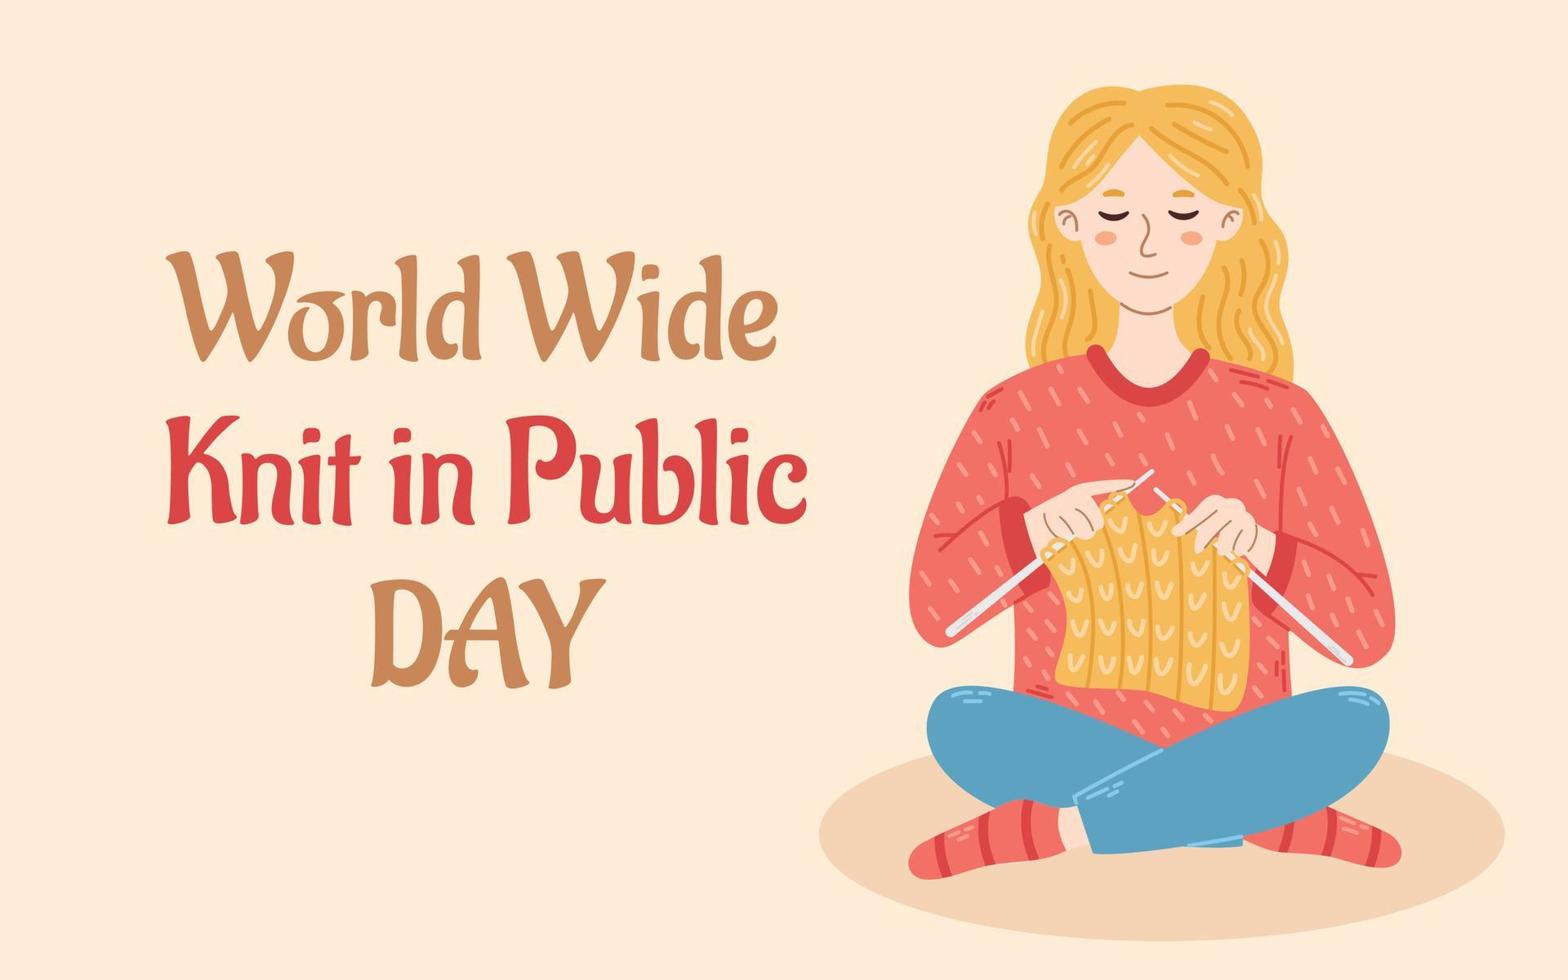 World wide knit in public day banner. Handmade concept. Woman knits sitting on the ground. Vector poster for knitting day in public place. Smiling girl knits.